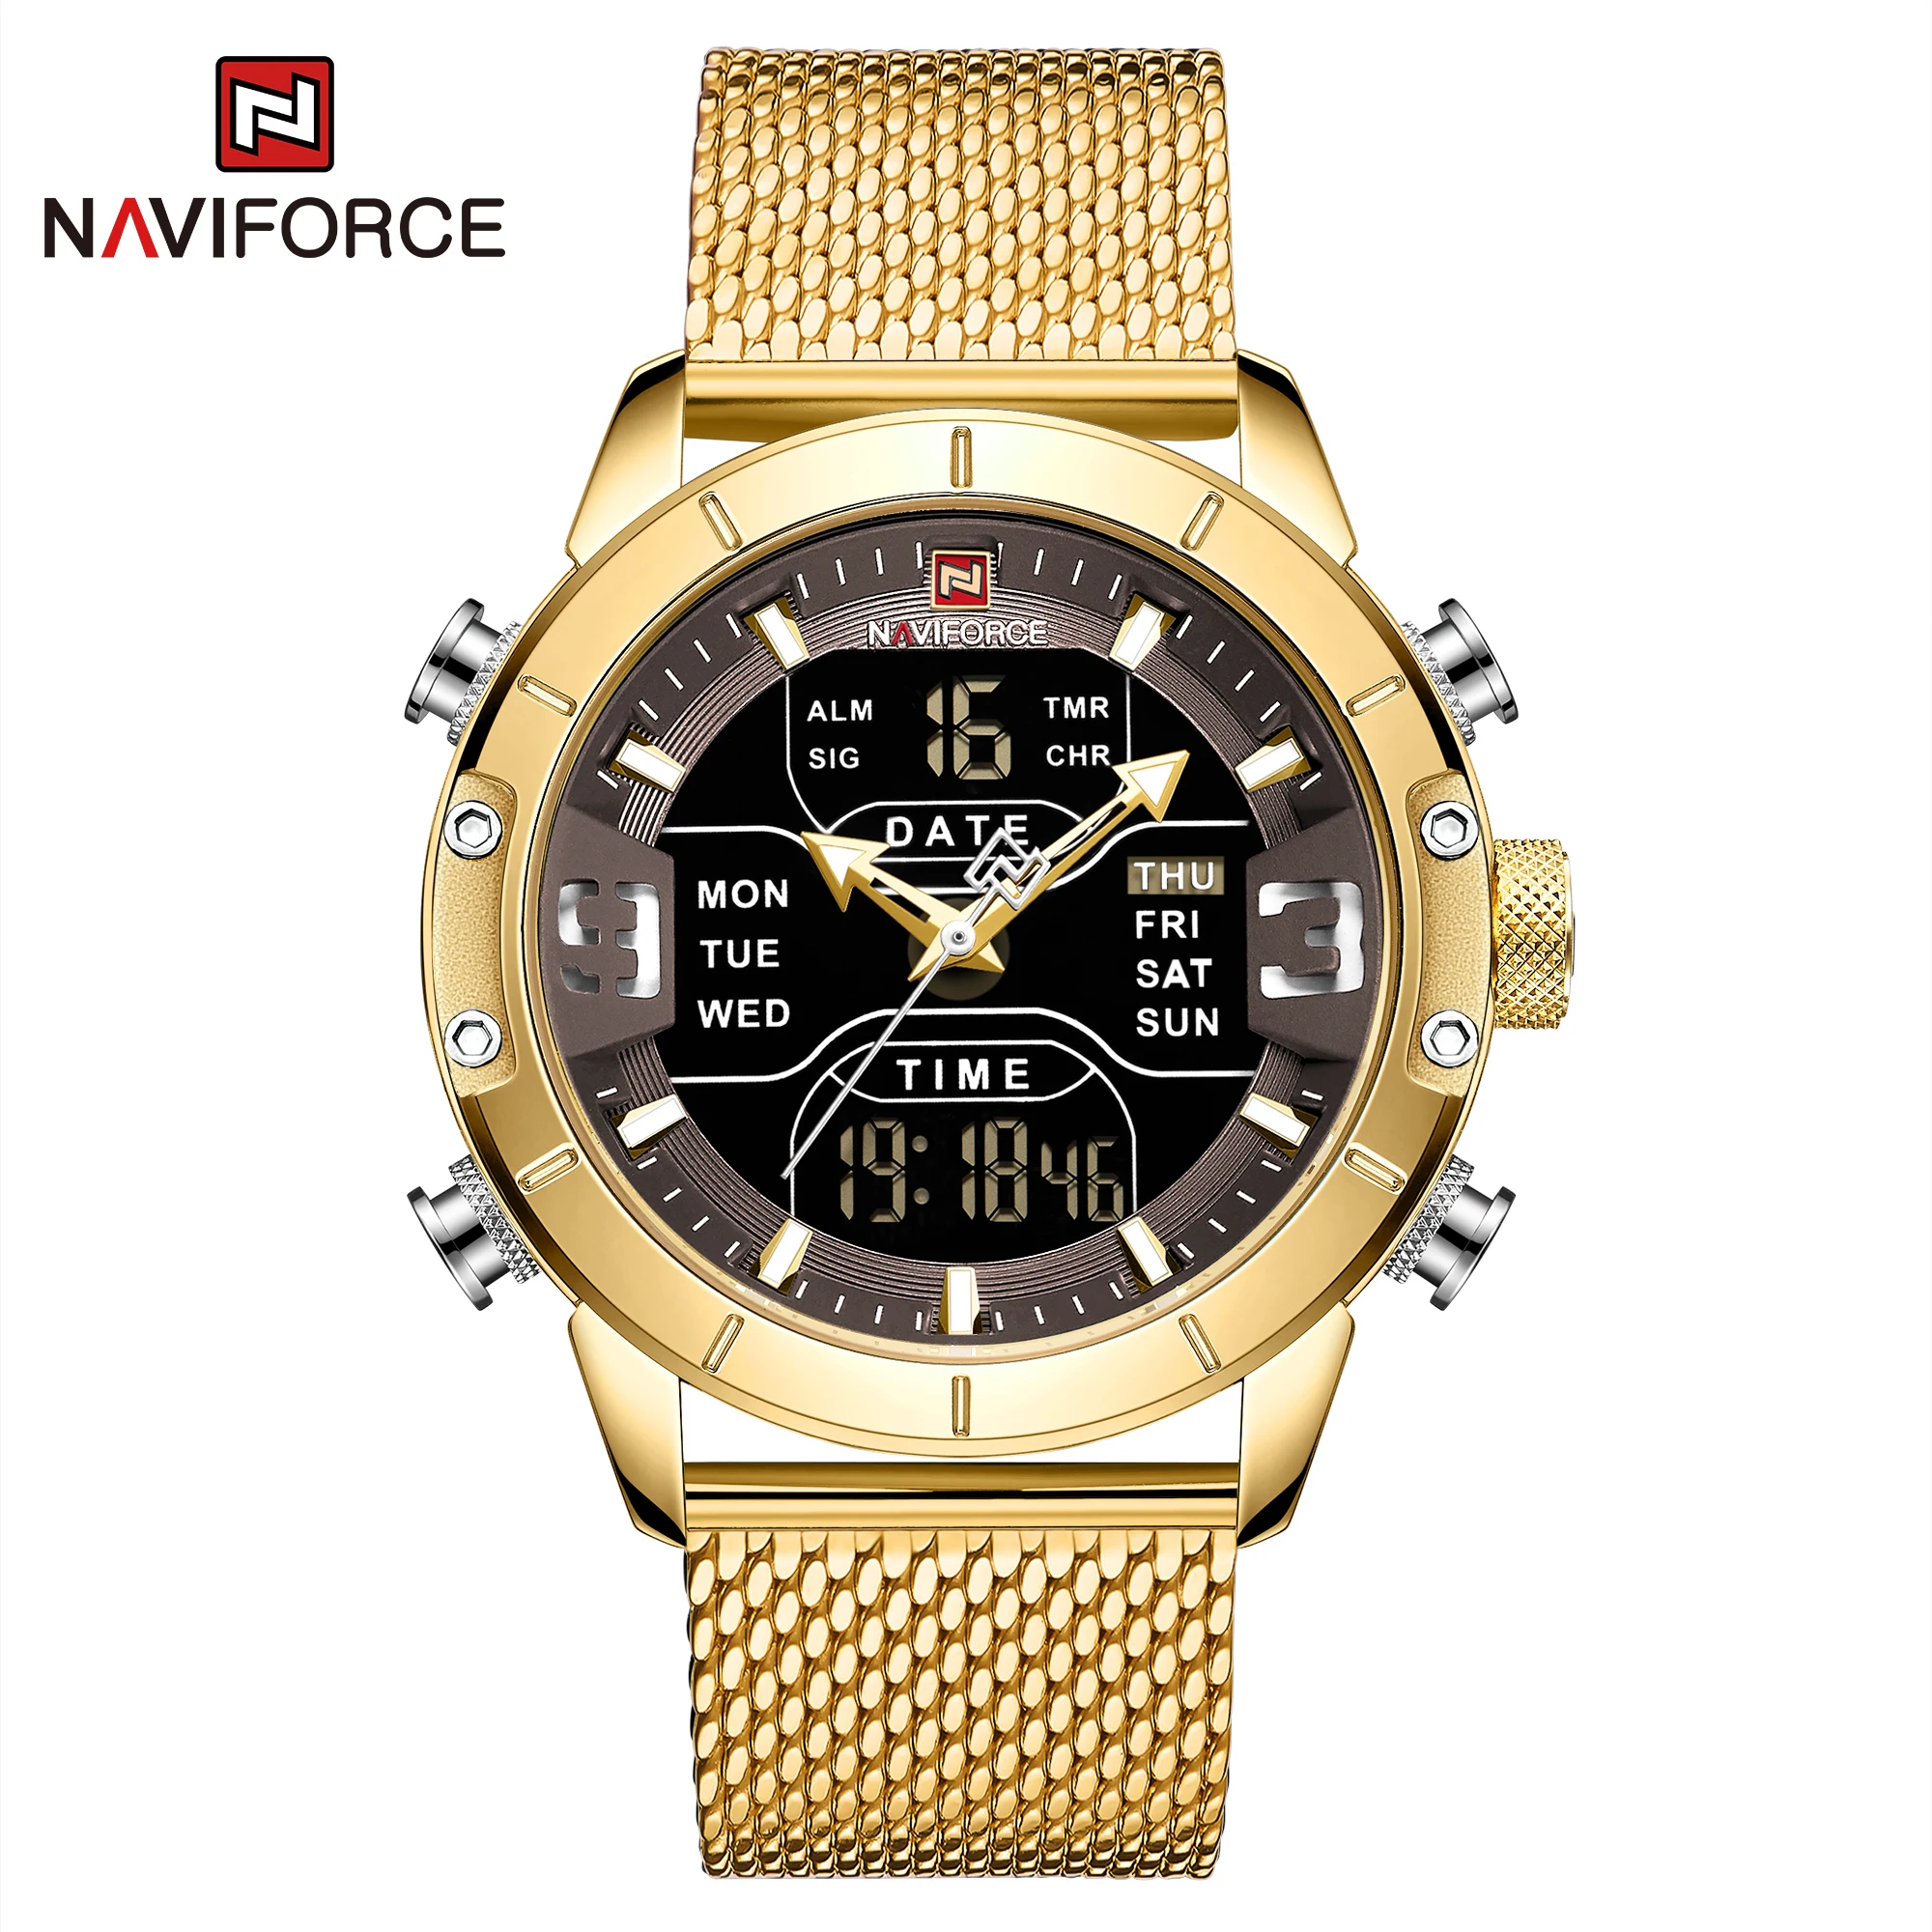 NAVIFORCE Luxury Watches Mens Military Sport Waterproof Luminous Dual Time Led Digital Stainless Steel Watches Relogio Masculino